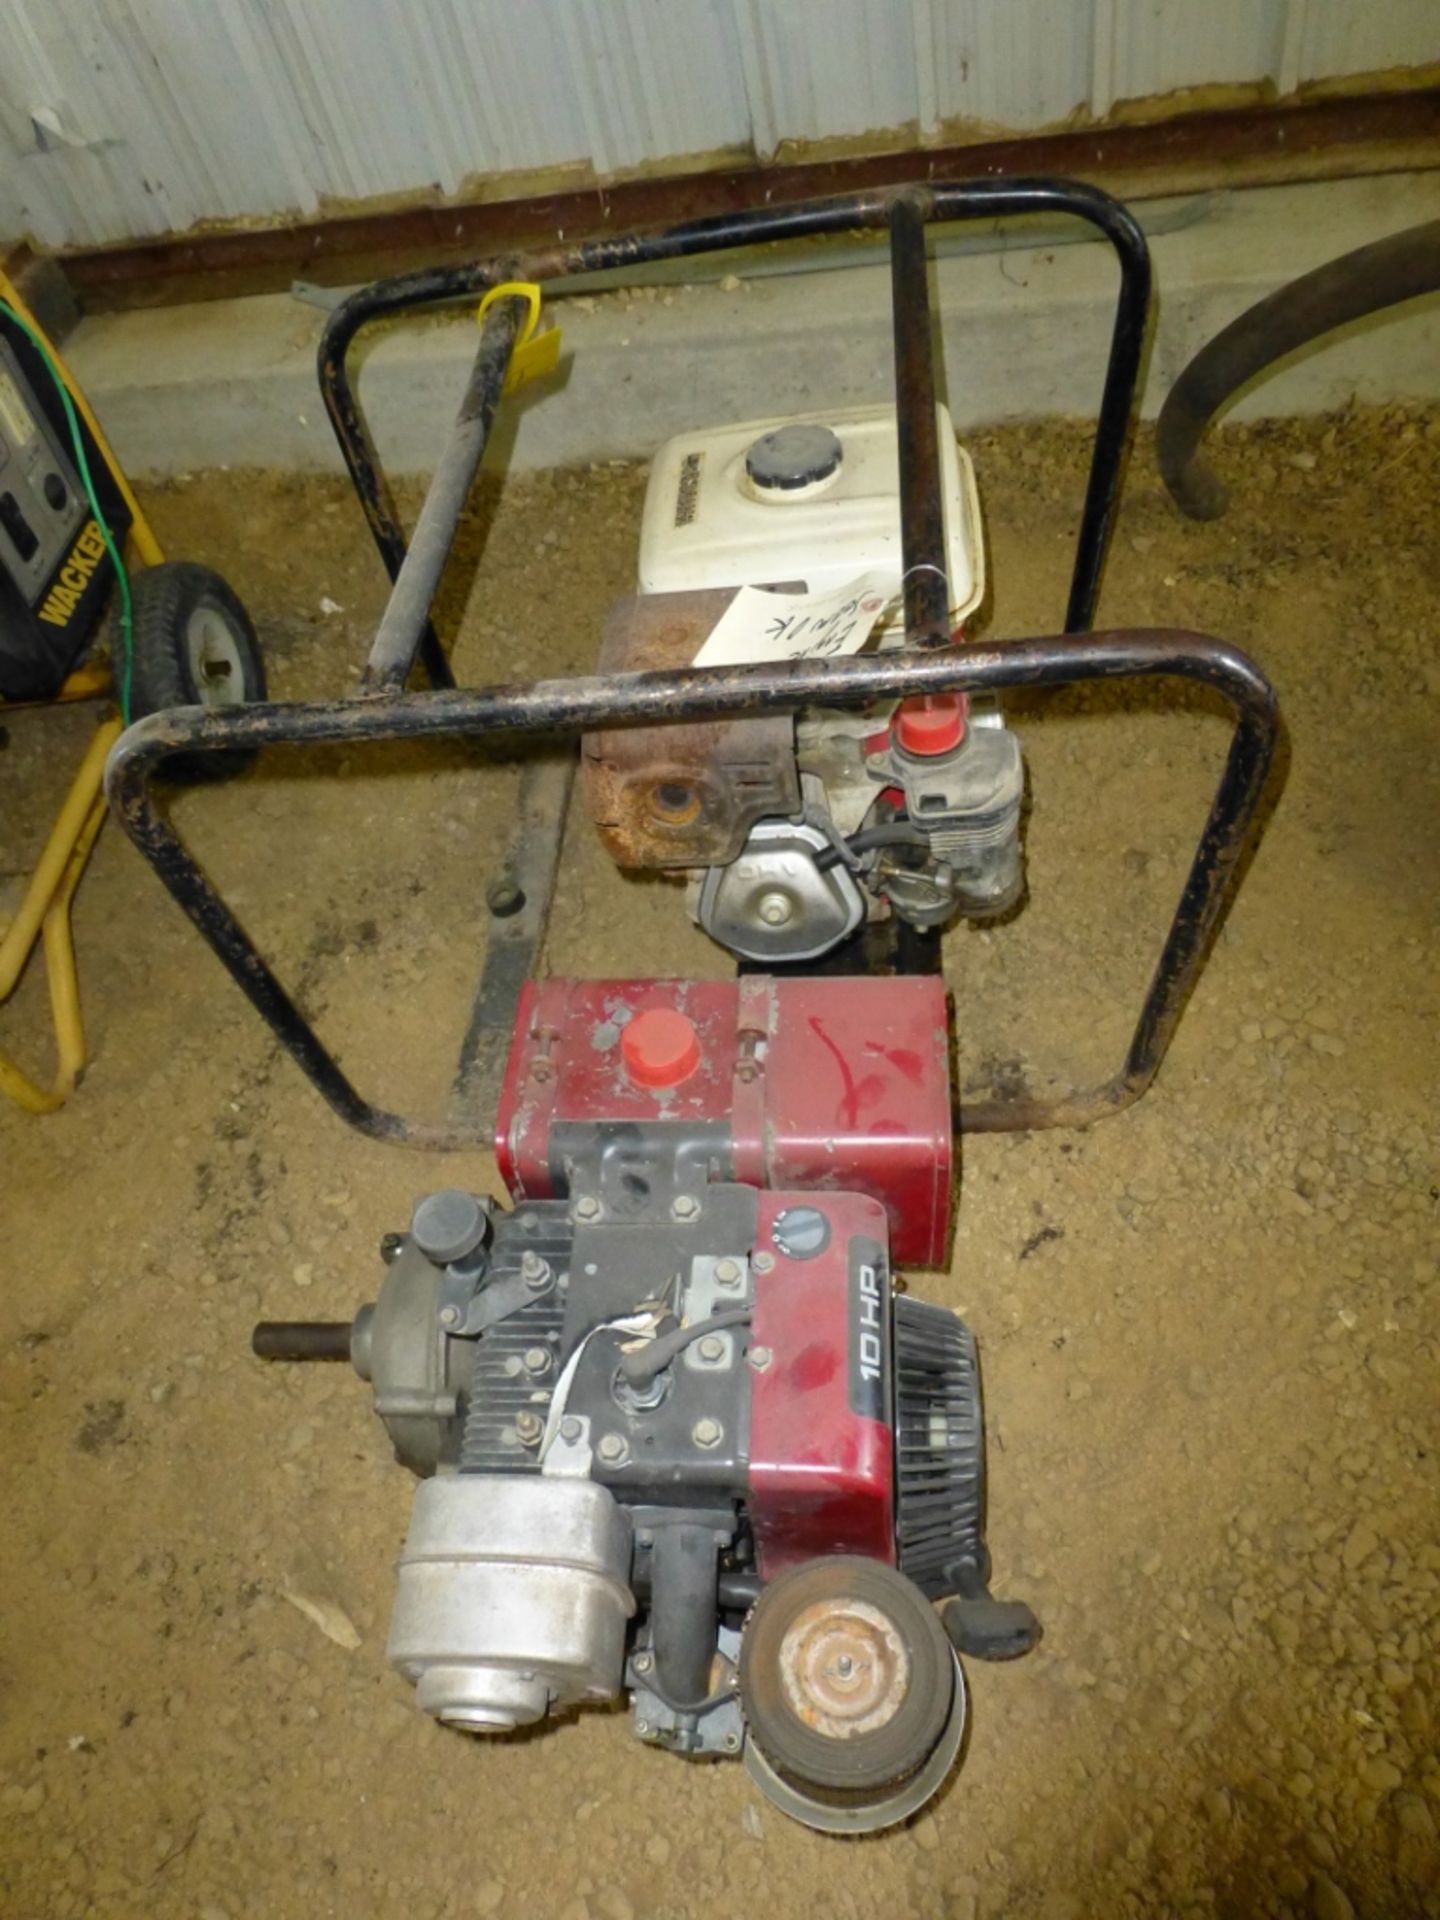 10hp Briggs industrial engine and engine in carrier crate, missing parts